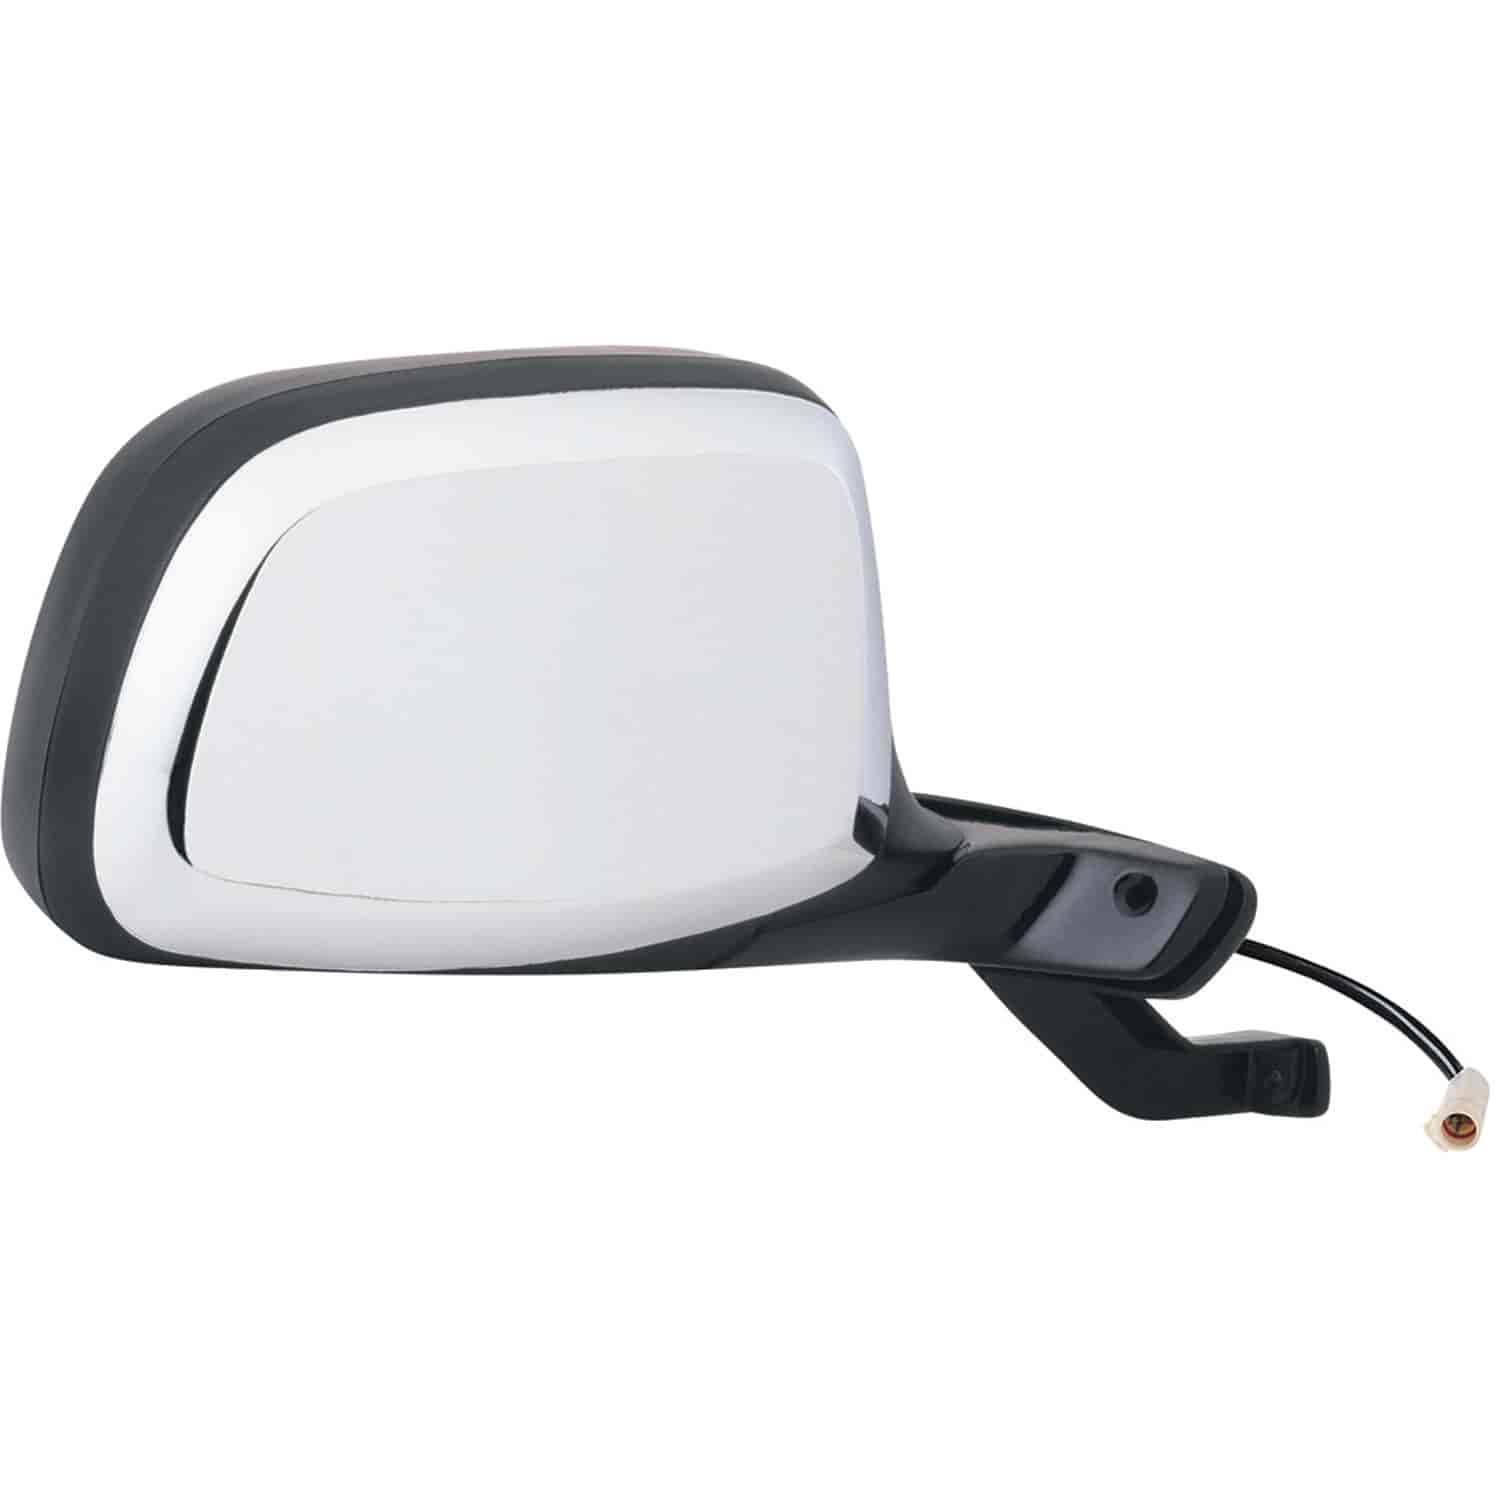 OEM Style Replacement mirror for 92-96 Bronco F150 F250 97 F250 HD 92-97 F350 w/o perf pkg passenger